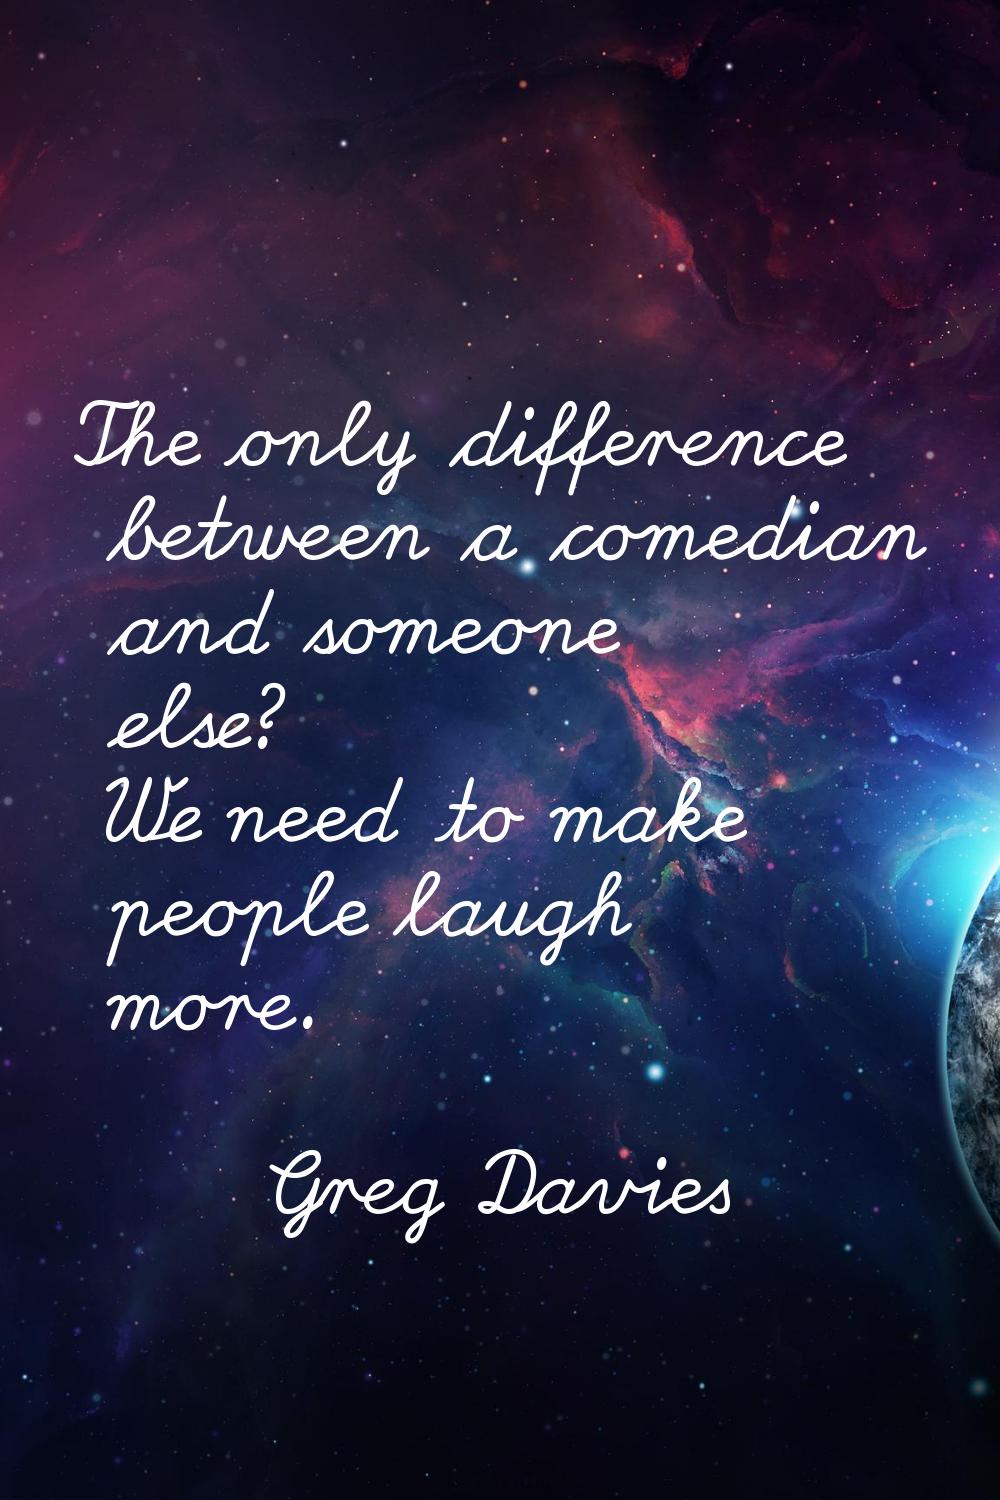 The only difference between a comedian and someone else? We need to make people laugh more.